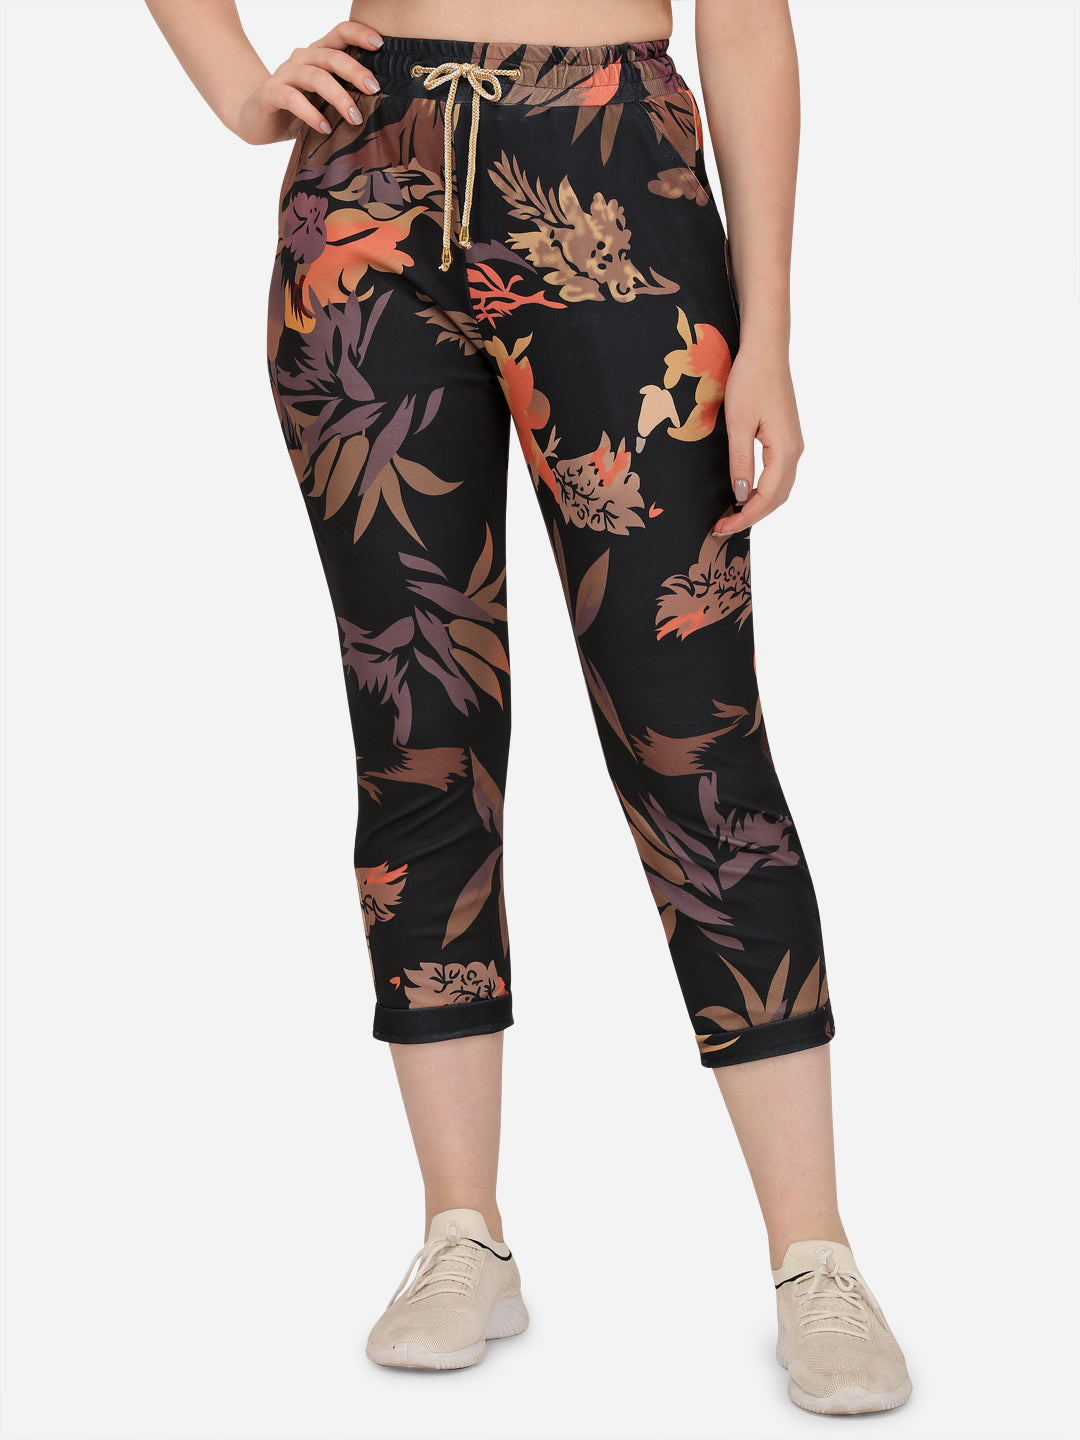 Women's Loose Lower Comfortable Western Classy Track Pants